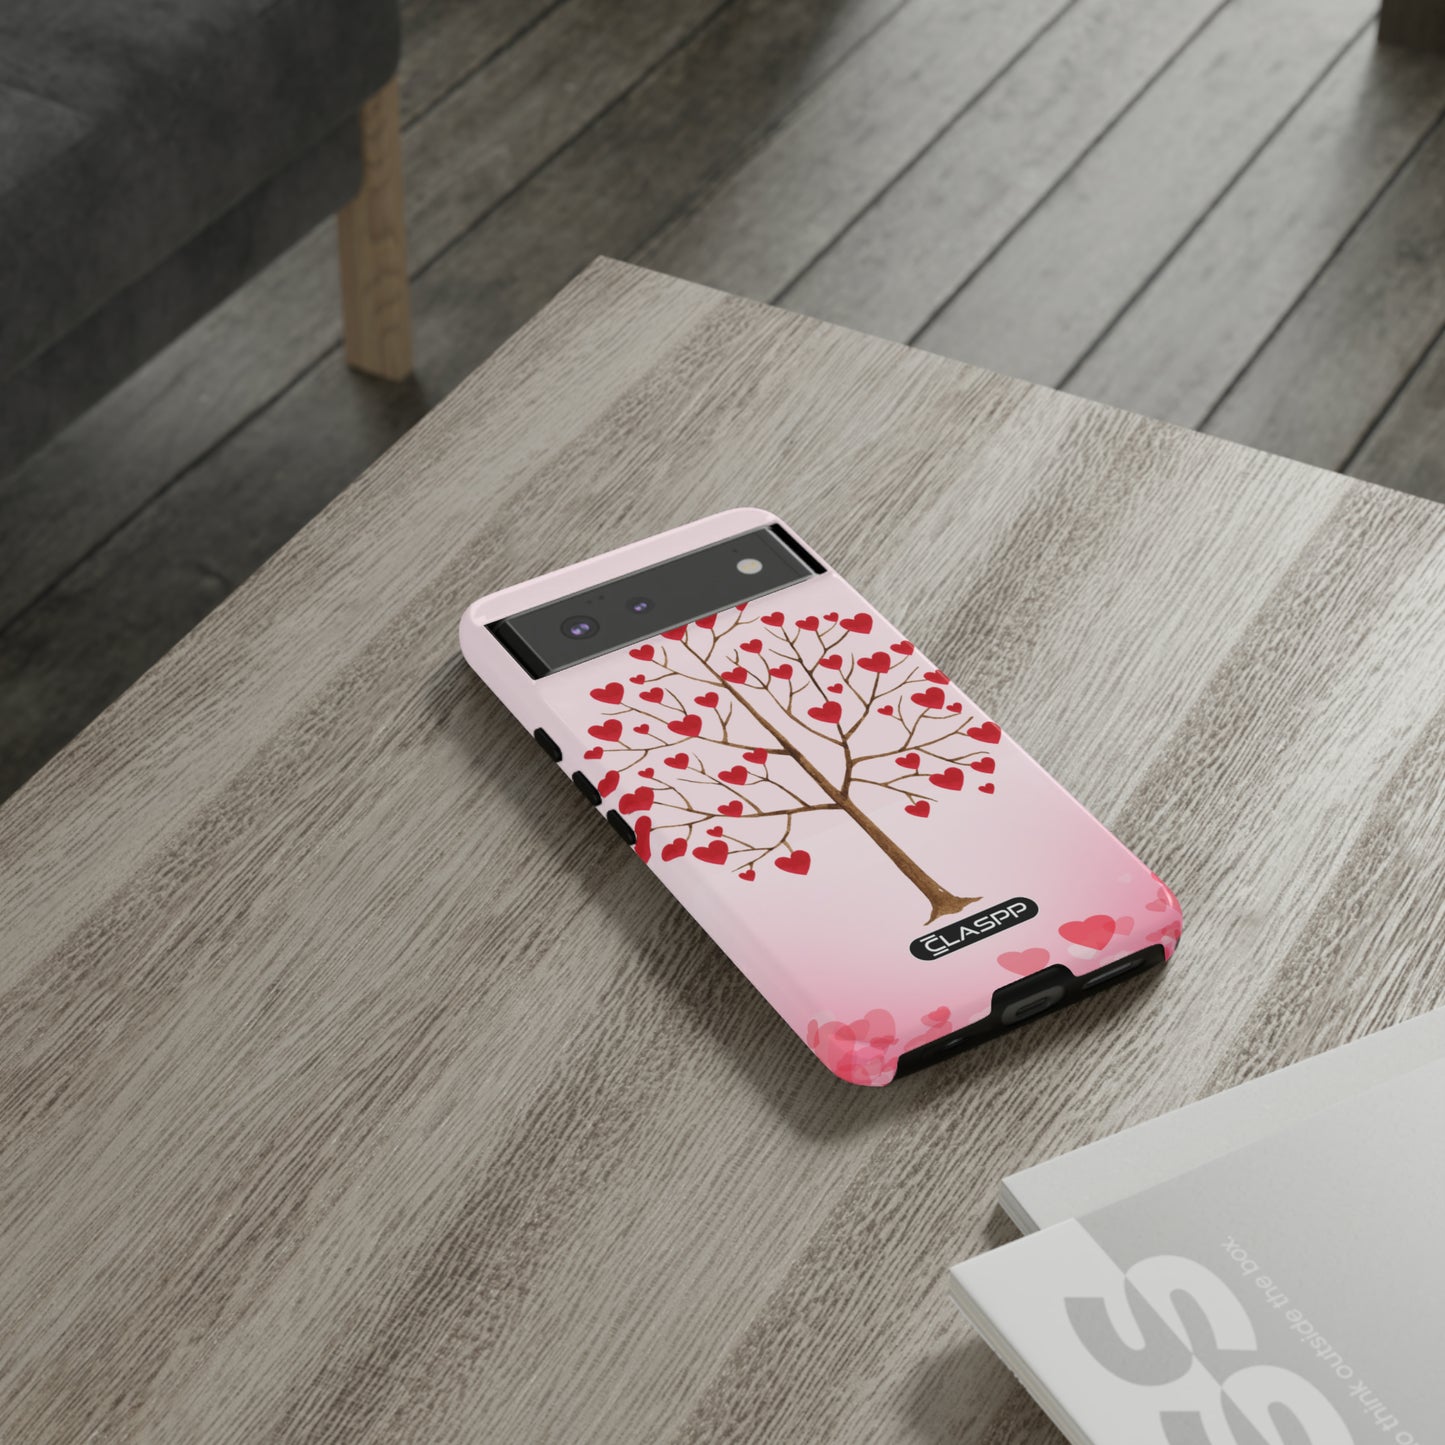 Tree of Hearts | Valentine's Day | Hardshell Dual Layer Phone Case